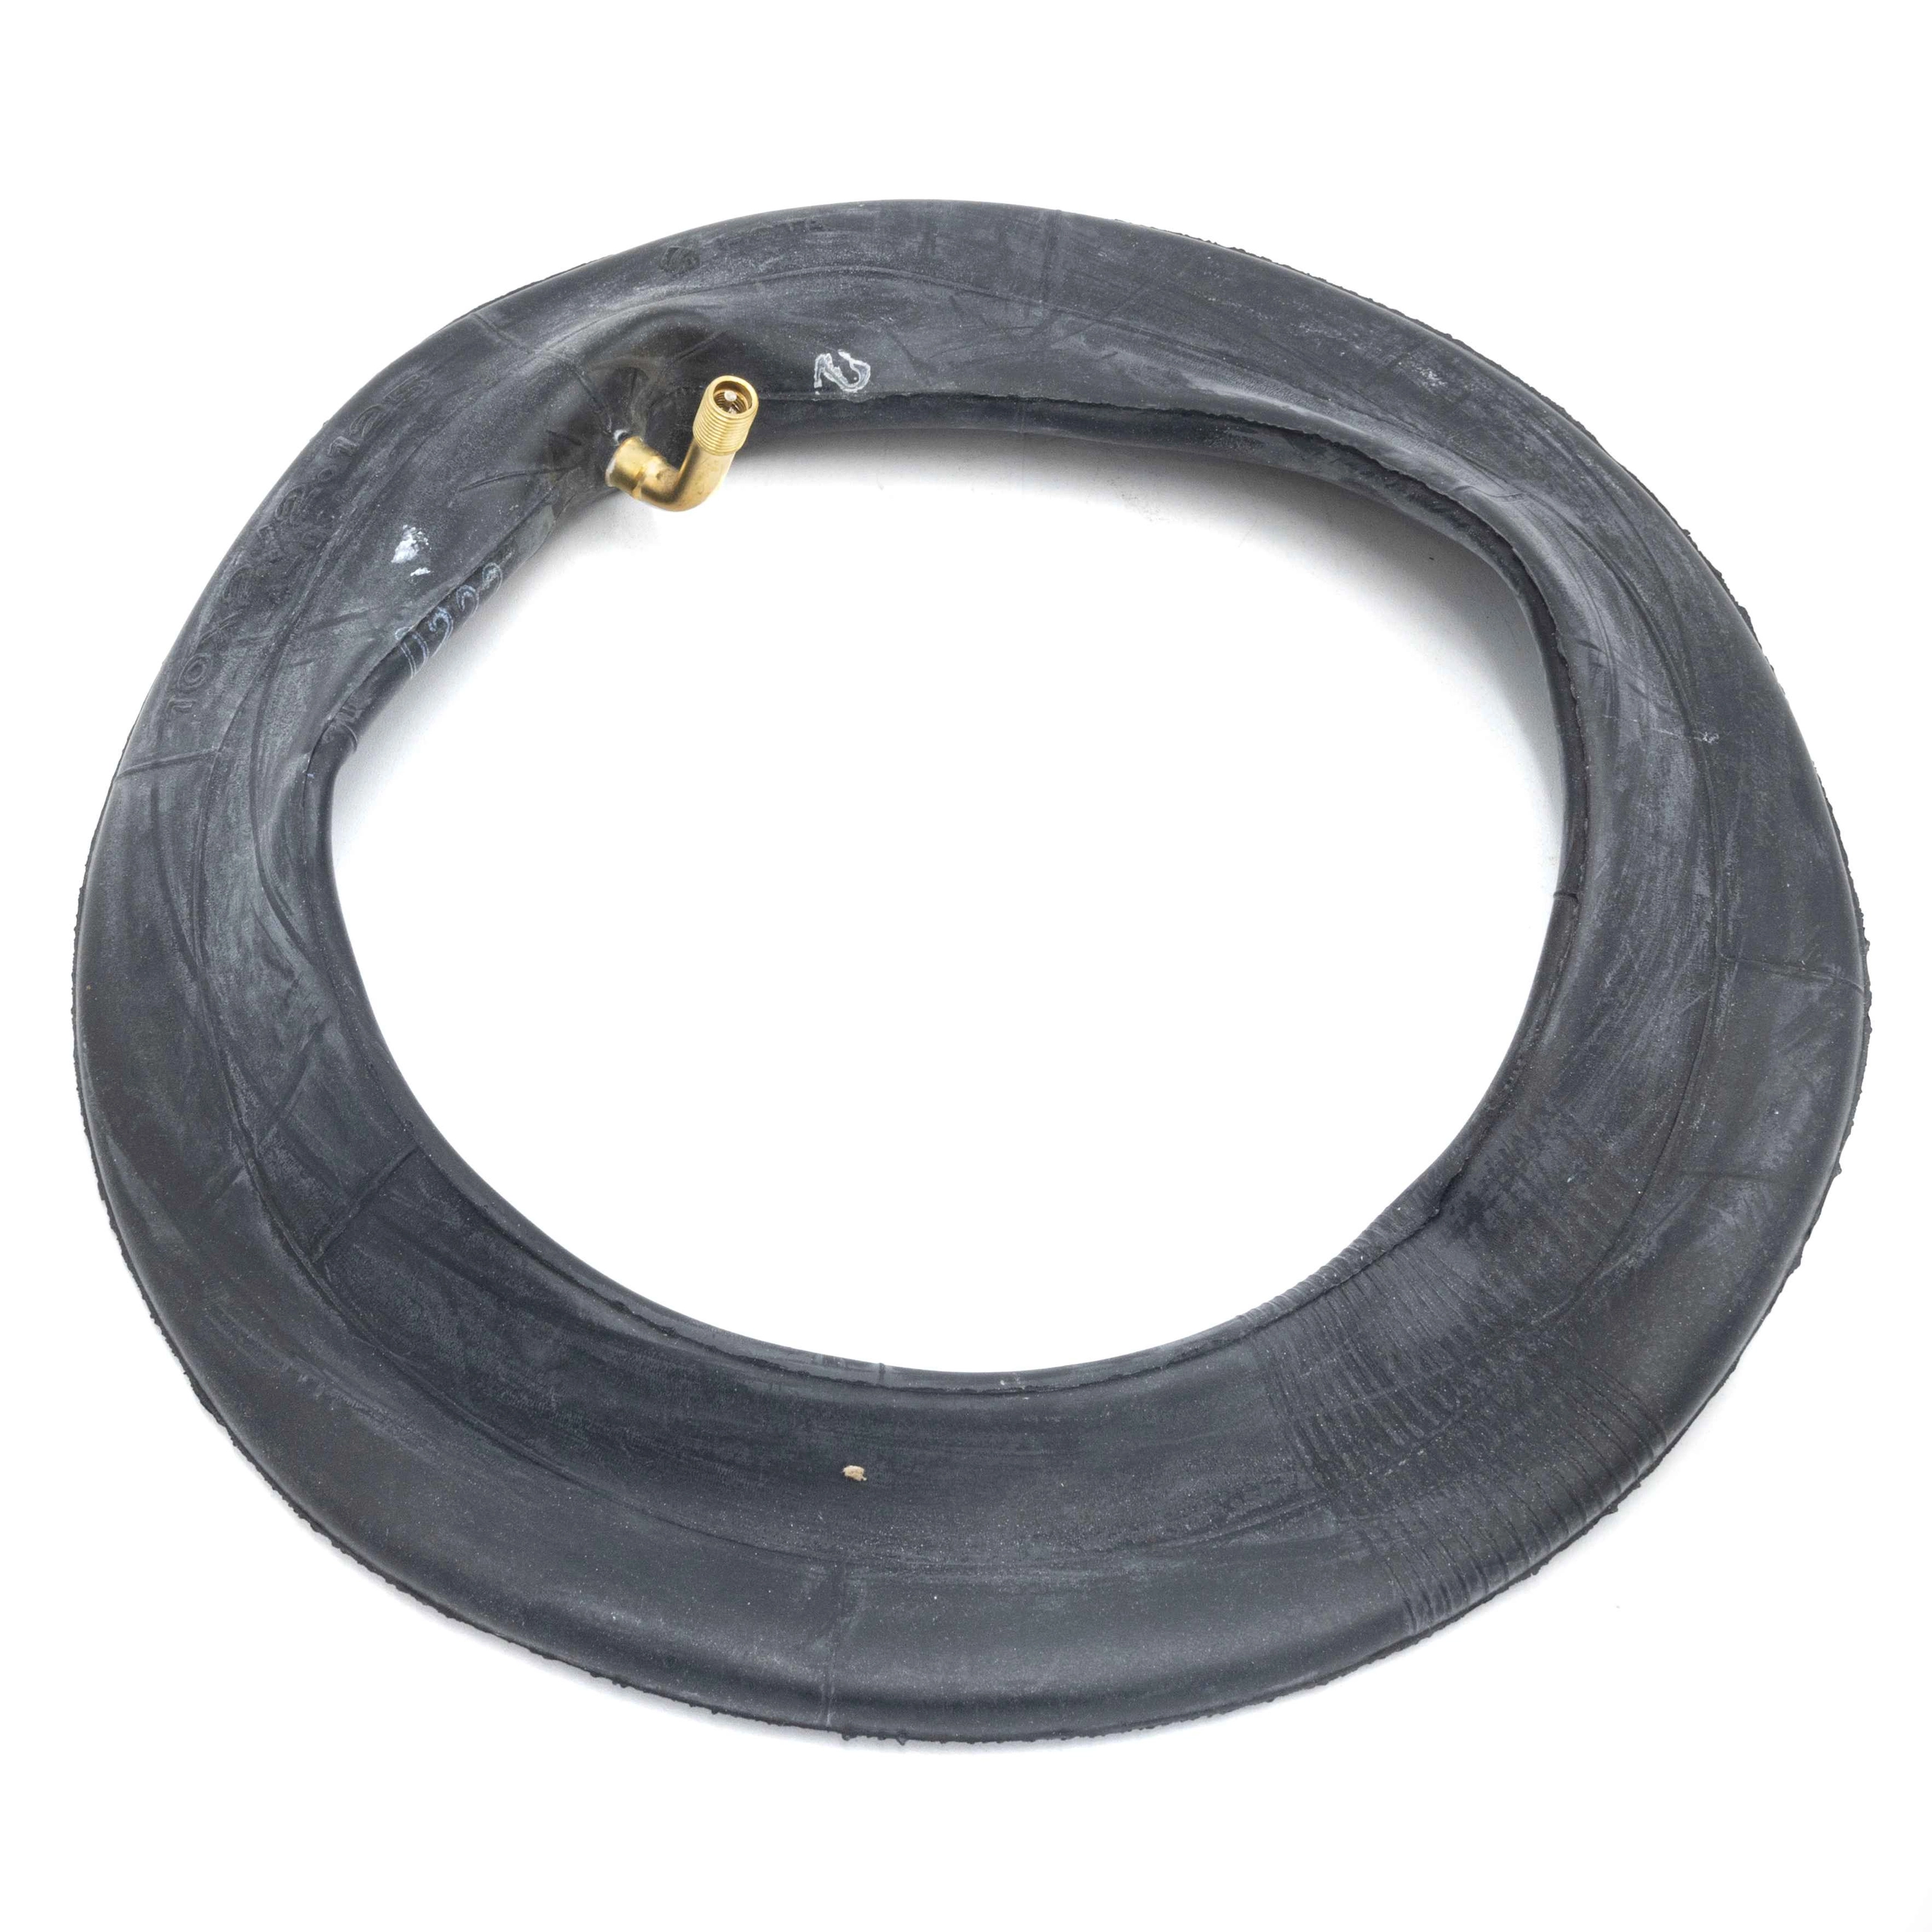 10x3 inner tube - Curved and straight valve